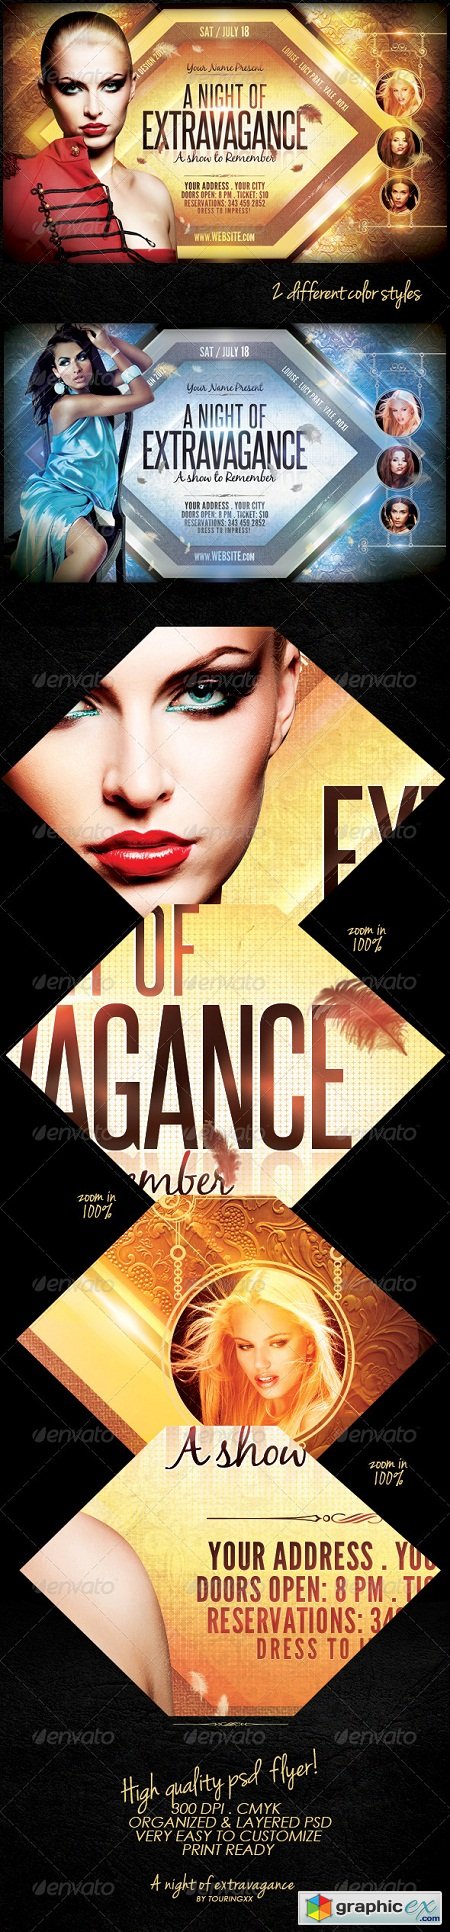 A Night Of Extravagance Flyer Template 2592809